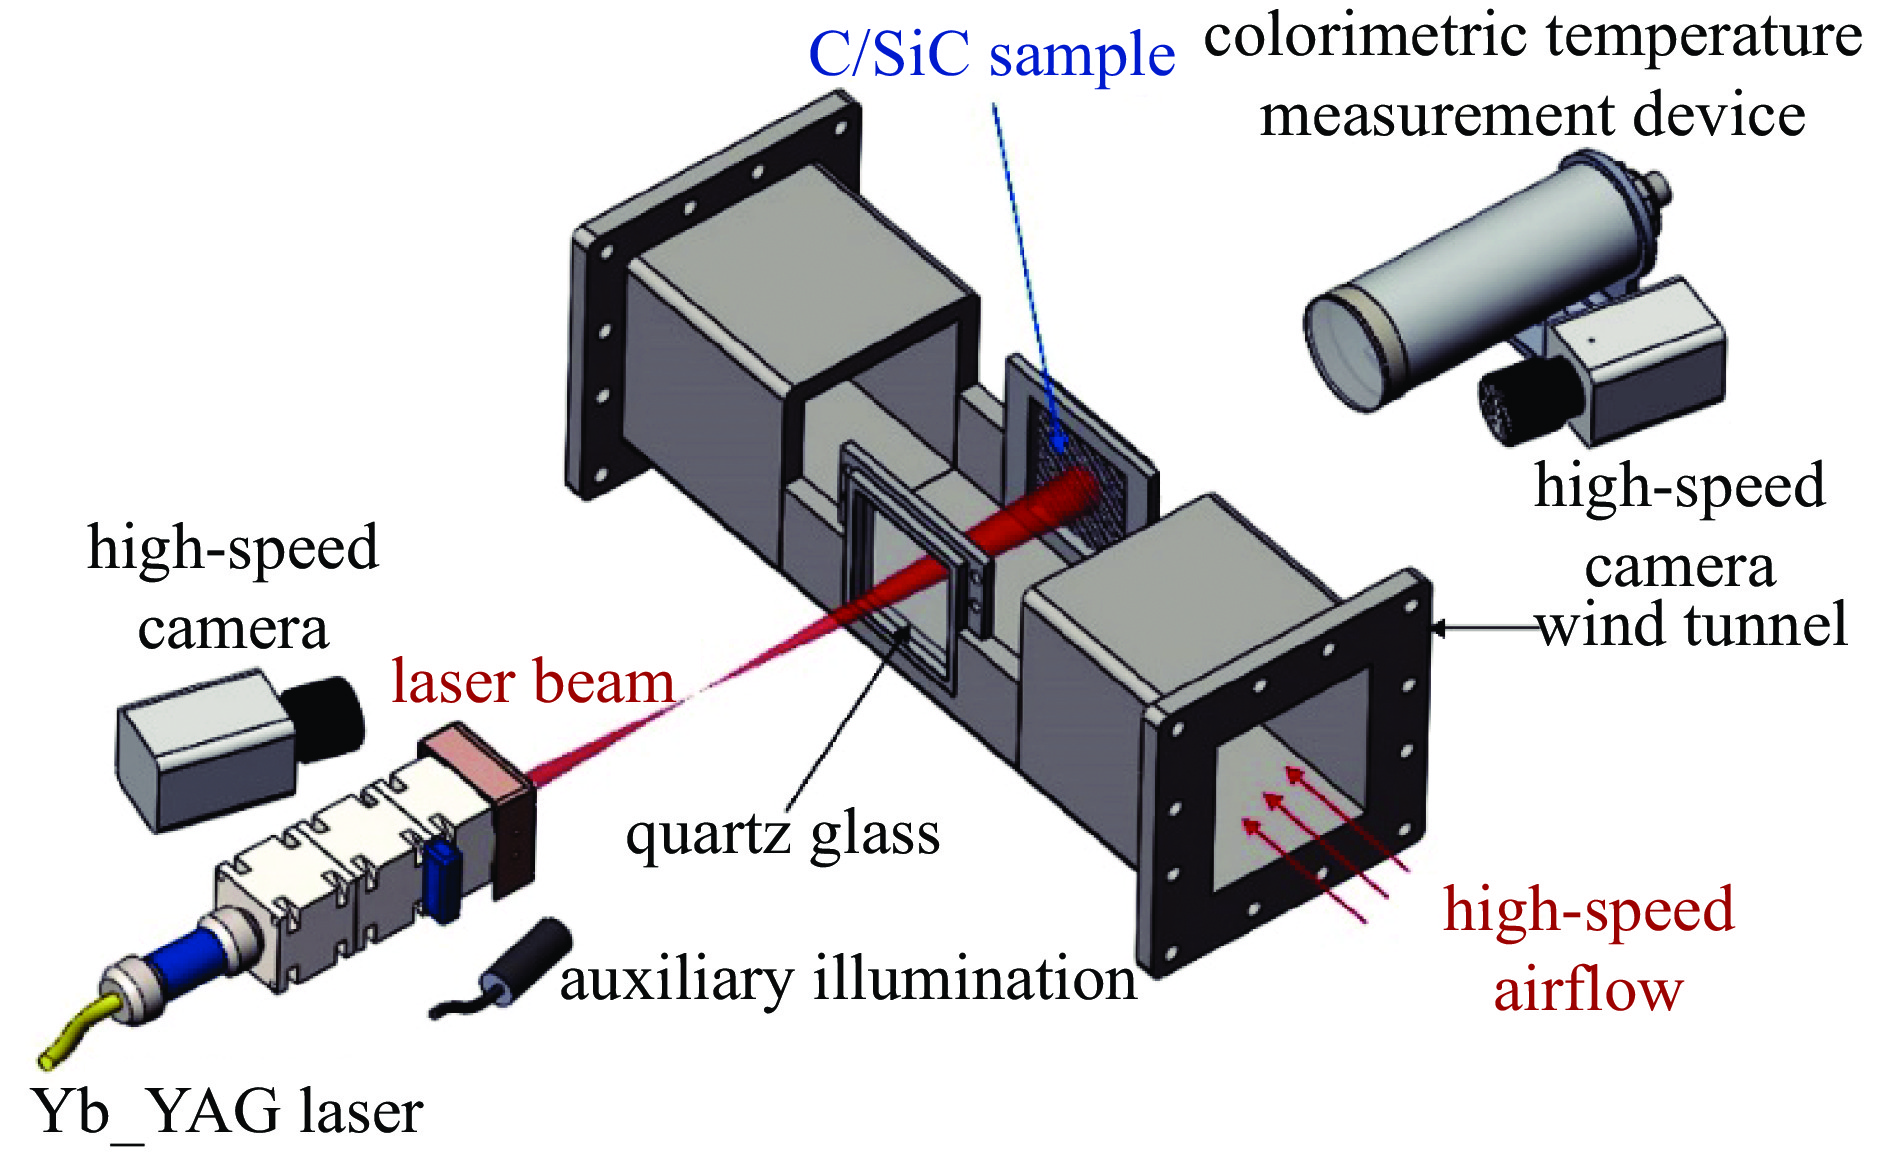 Schematic of the laser ablation tests system in the wind tunnel